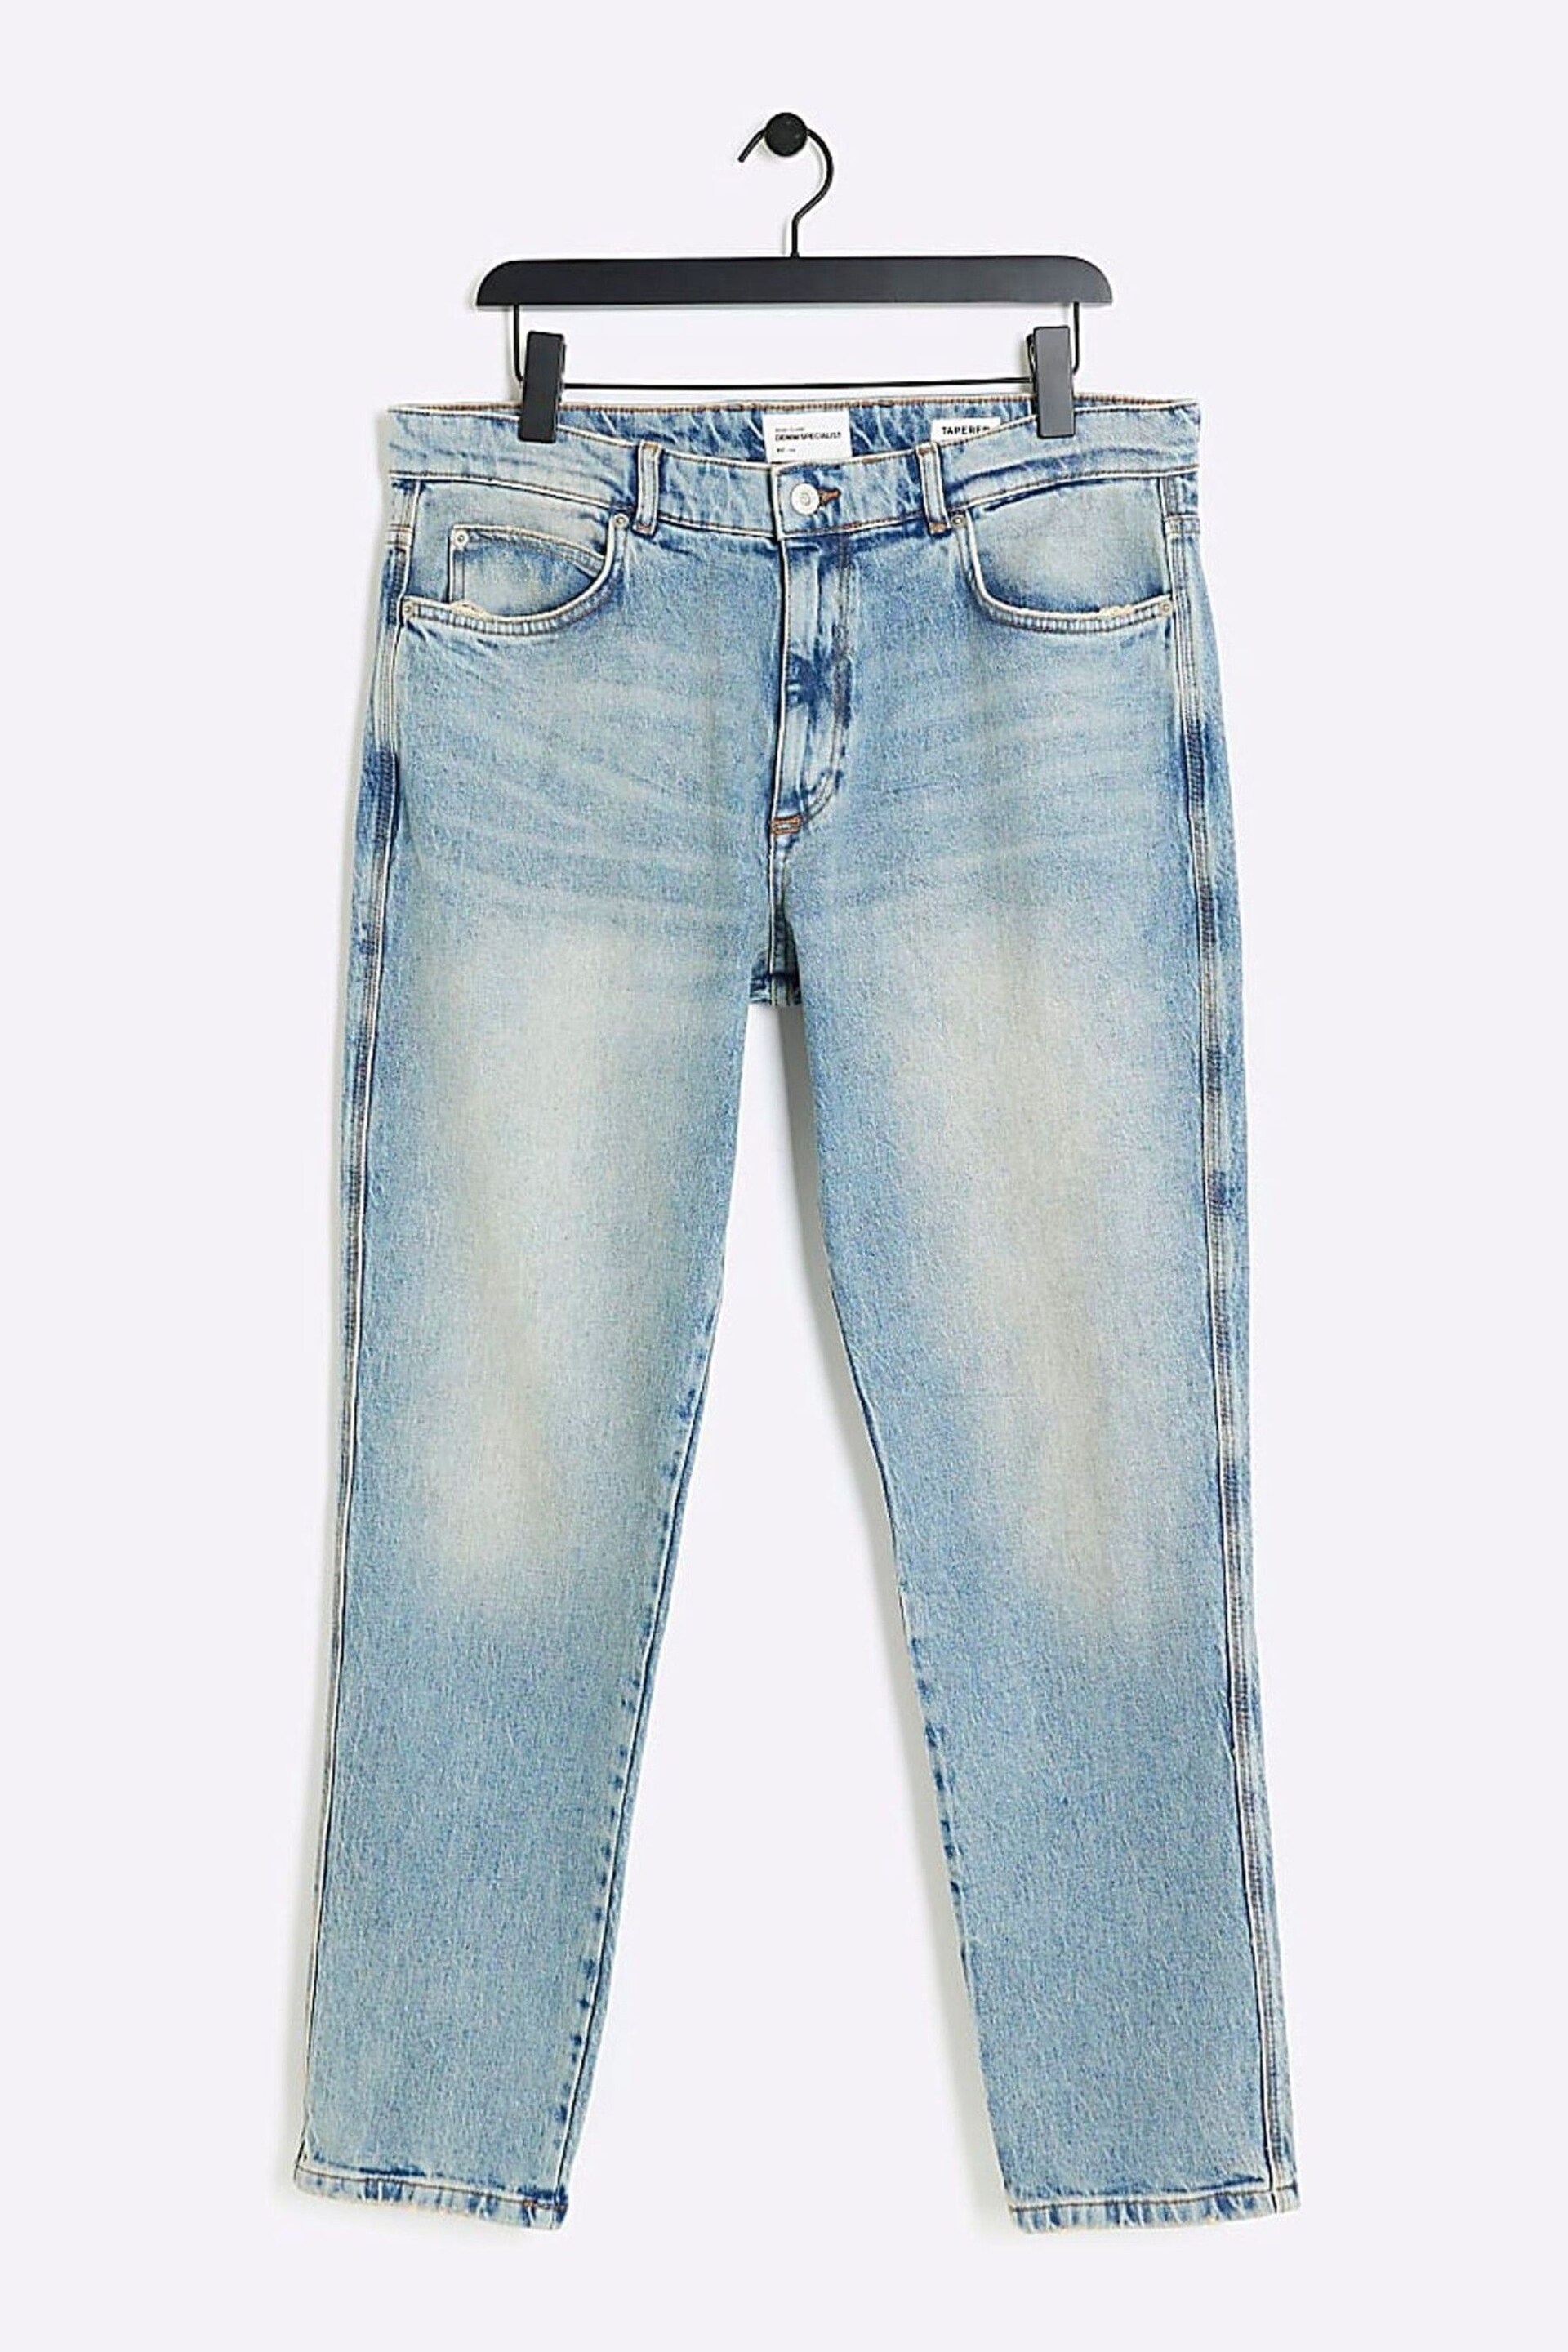 River Island Blue Tapered Fit Jeans - Image 5 of 6